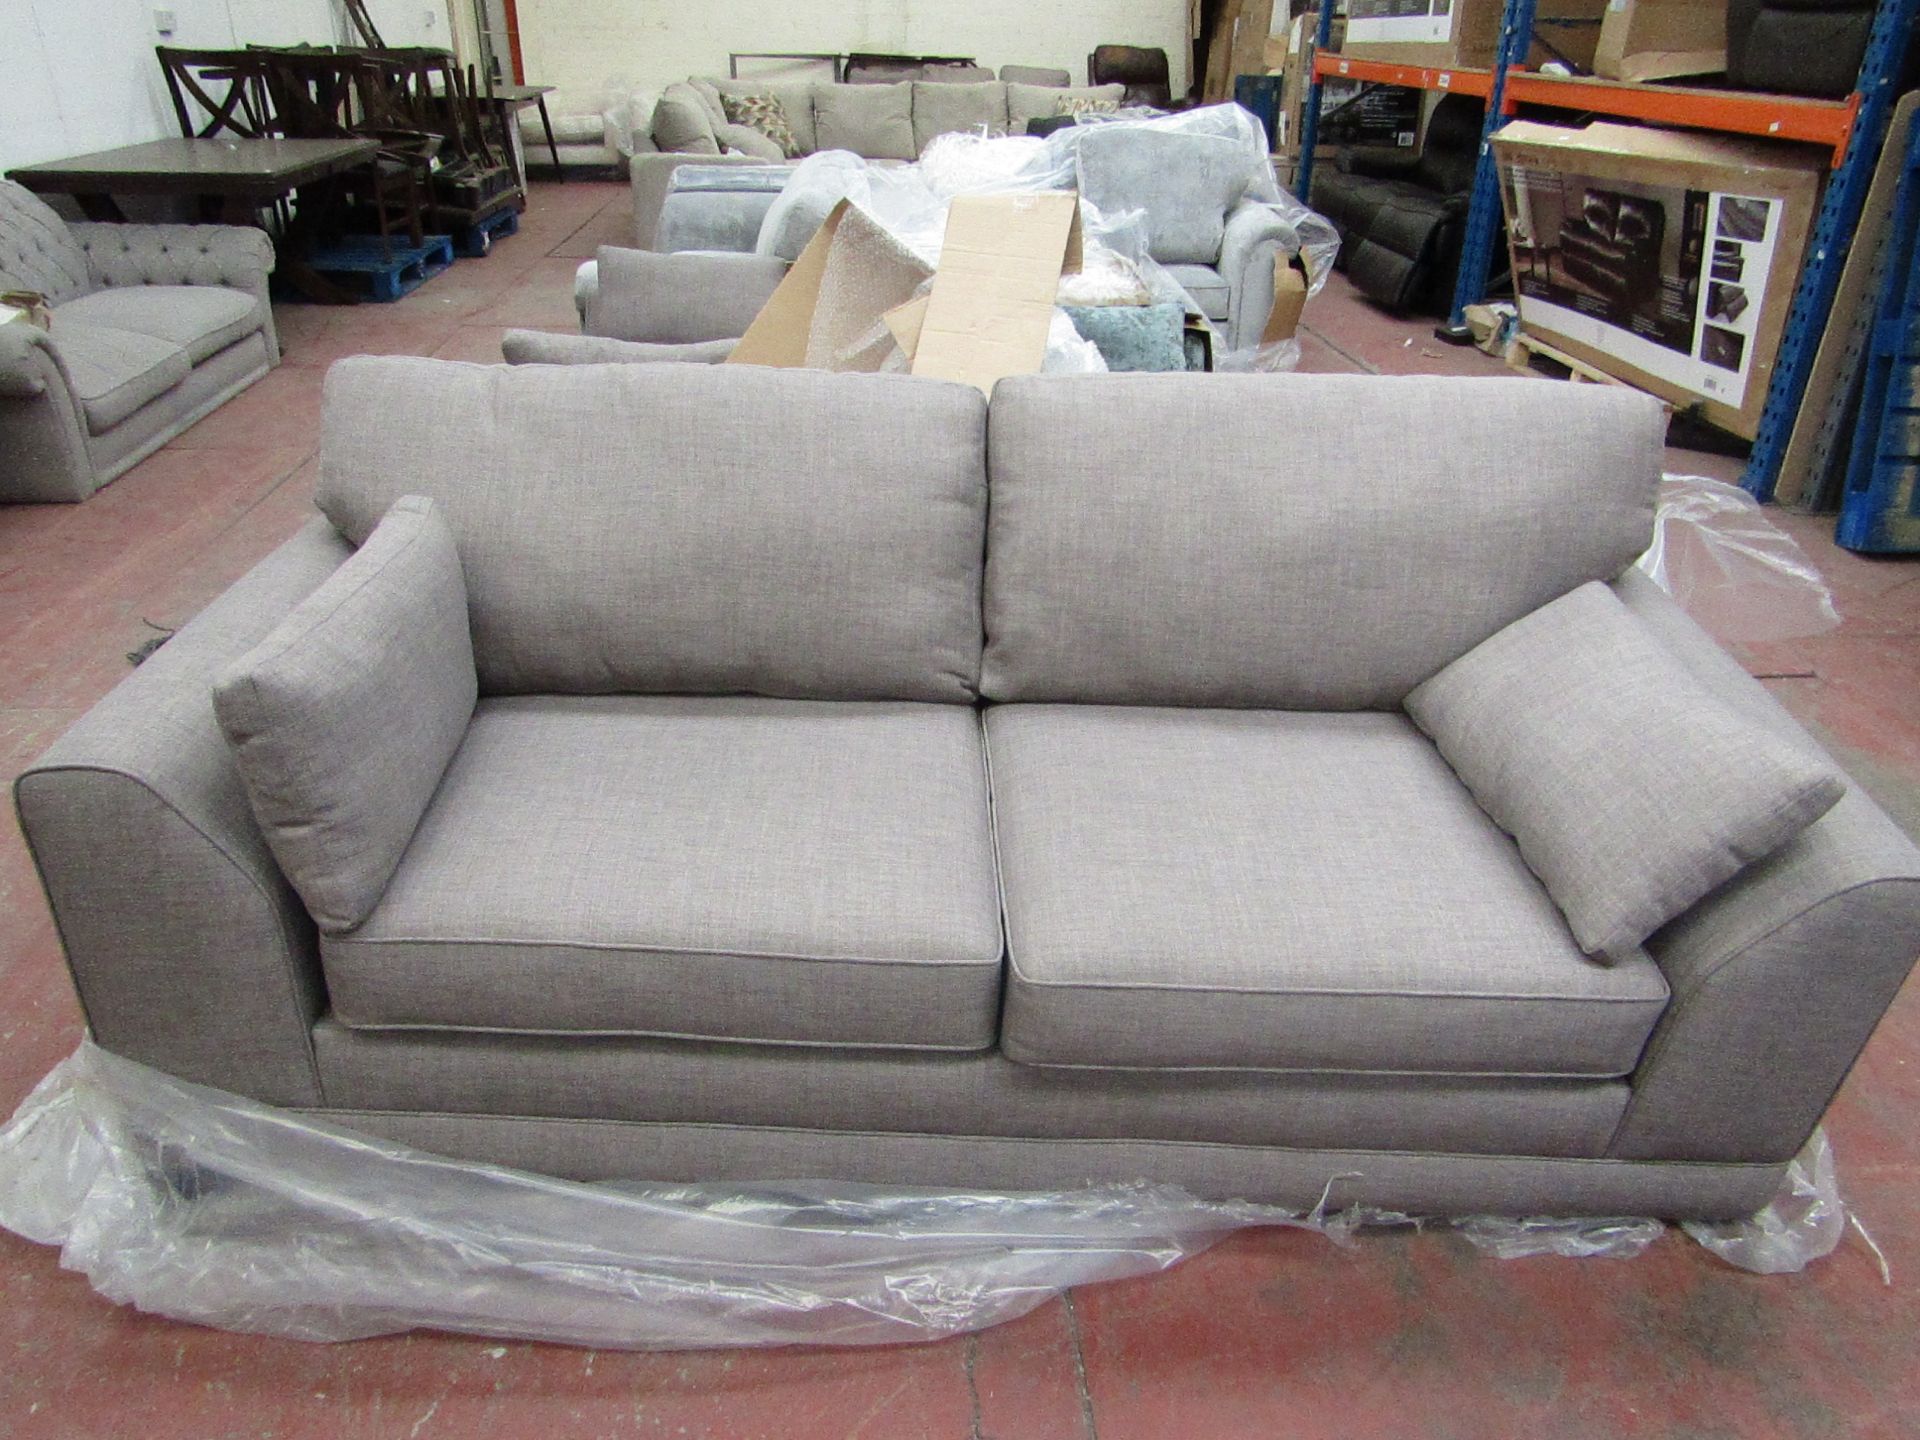 Swoon 3 Seater (2 cushion) Fabric sofa, Missing a leg at front